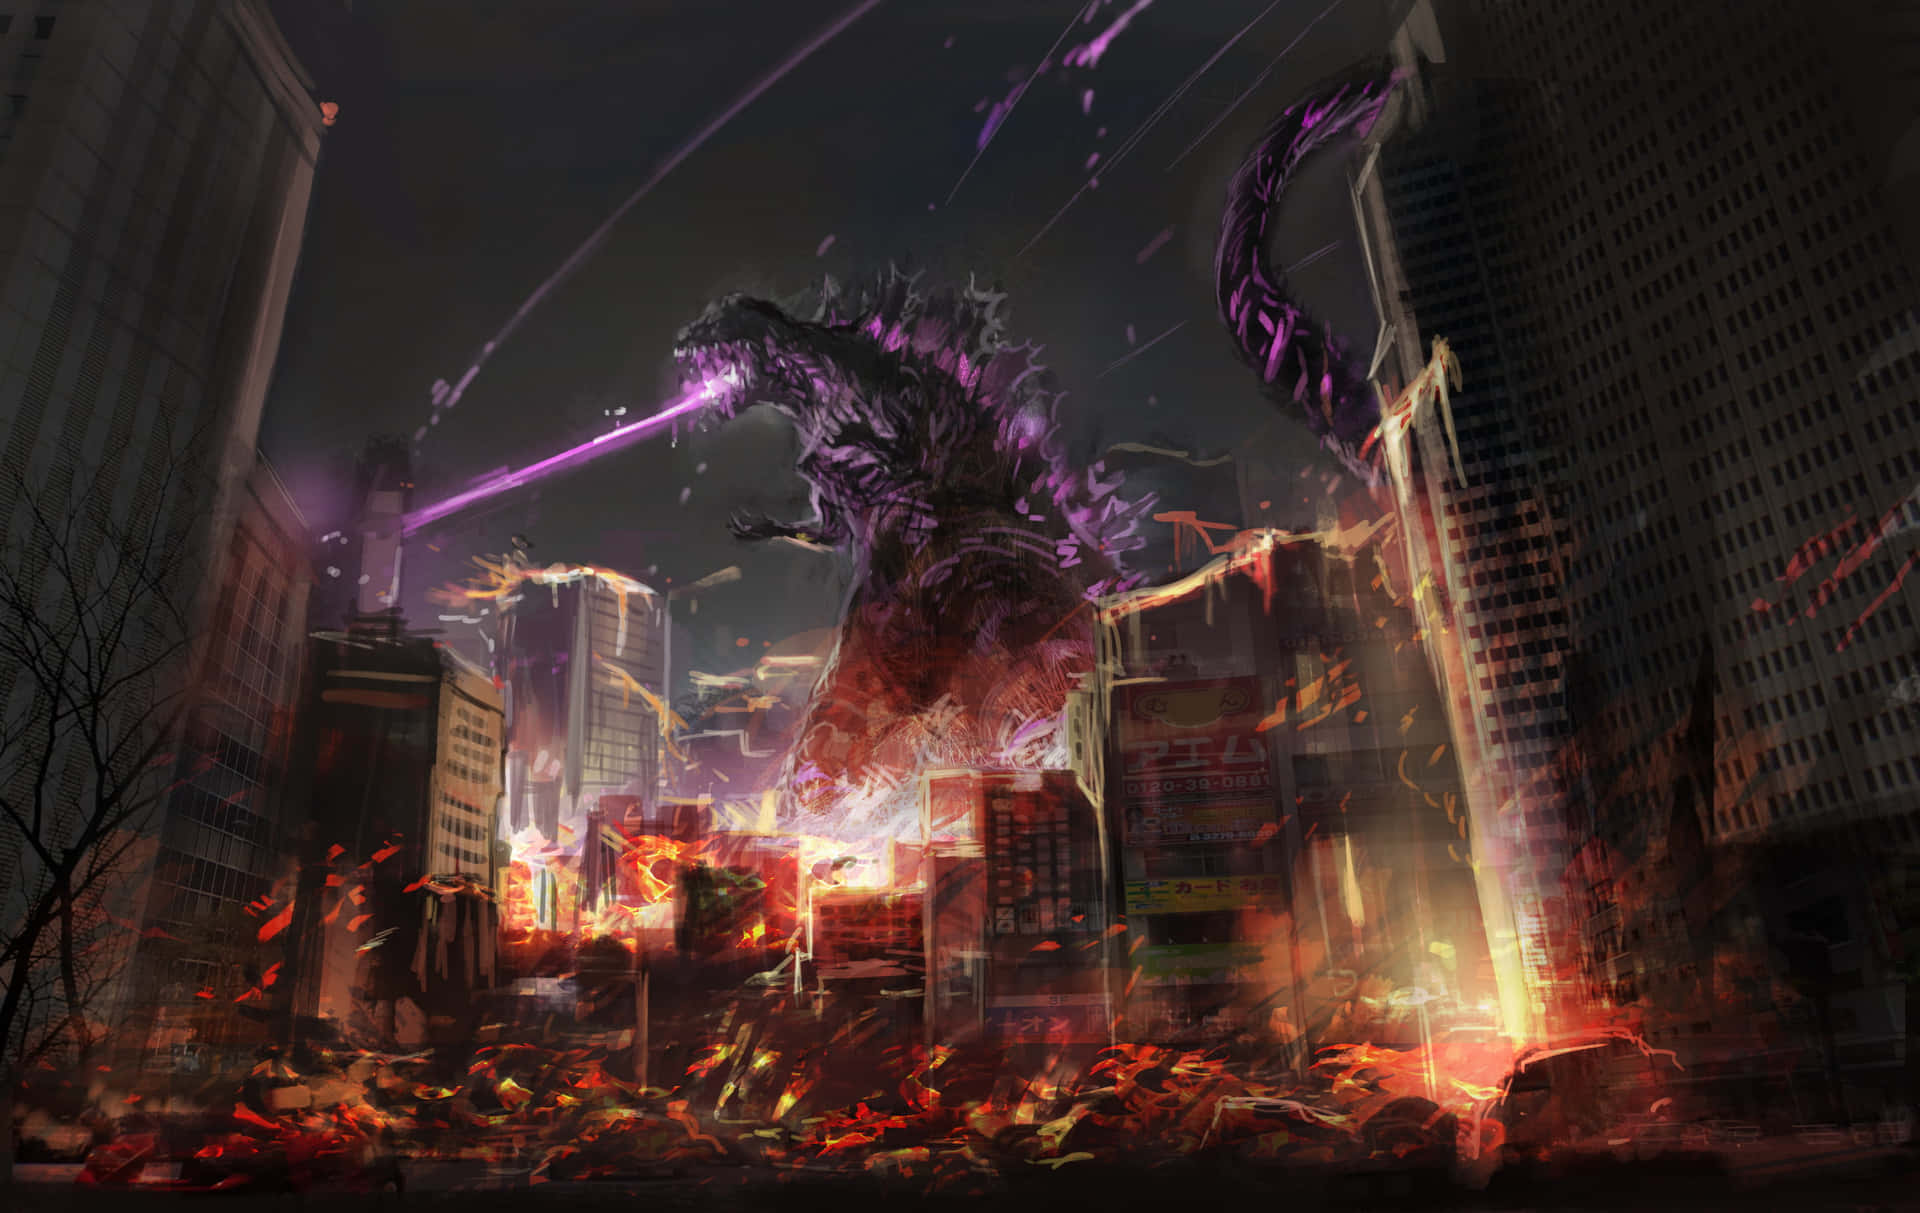 Godzilla stands victorious against a background of destruction